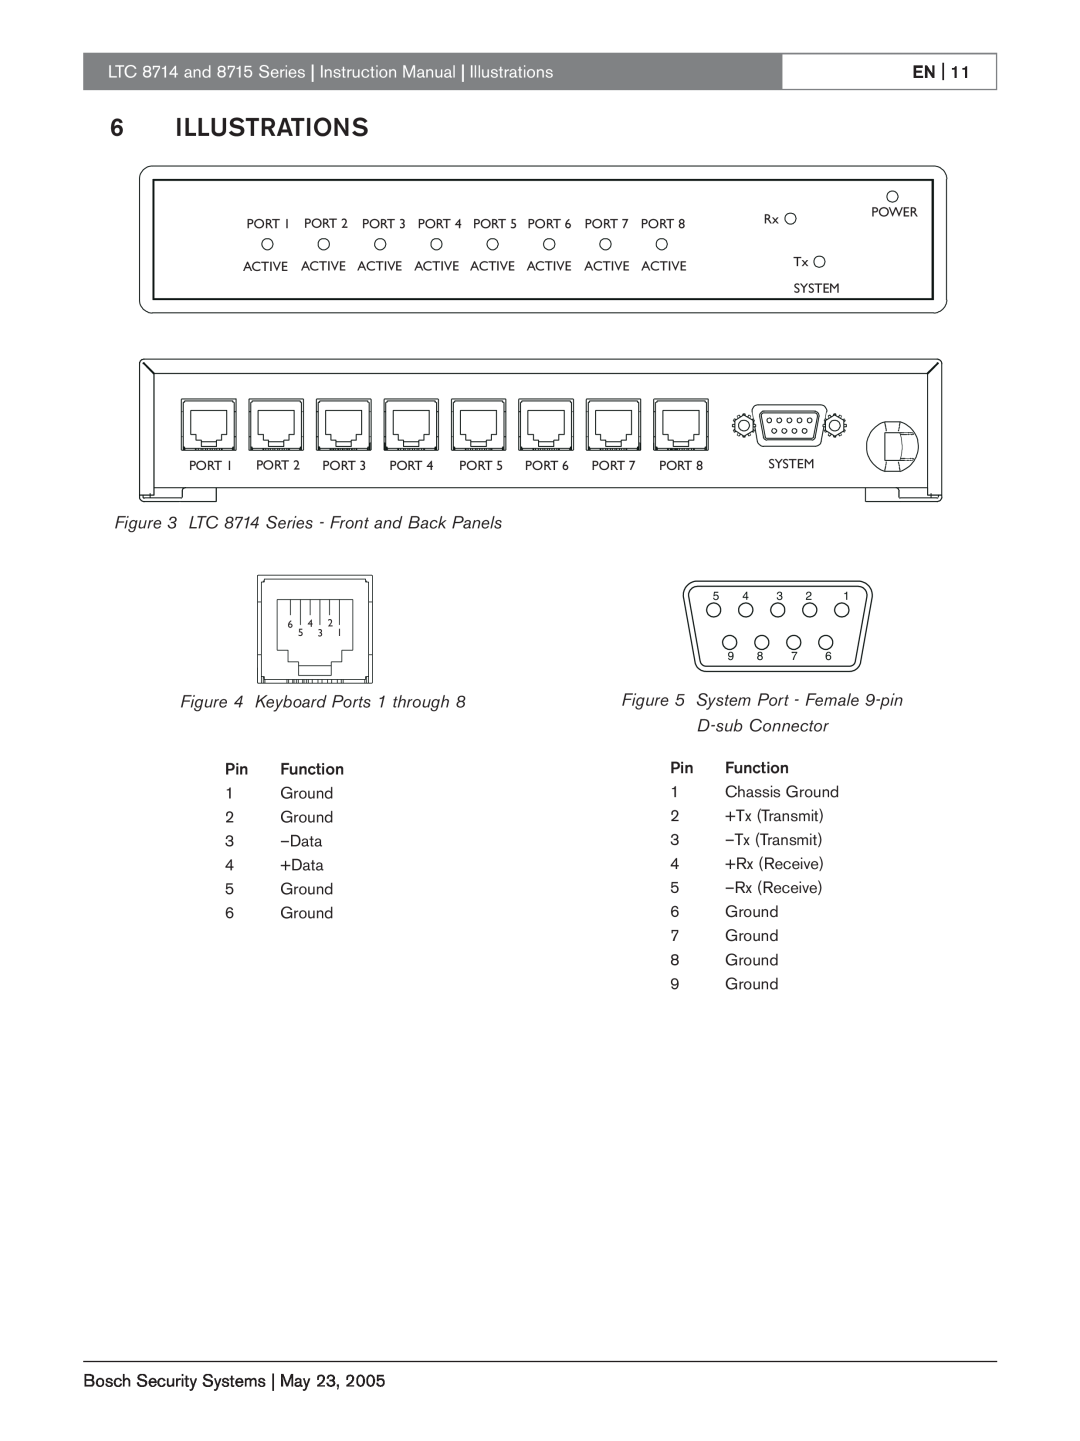 Bosch Appliances 6ILLUSTRATIONS, LTC 8714 Series - Front and Back Panels, Keyboard Ports 1 through, D-subConnector, En 